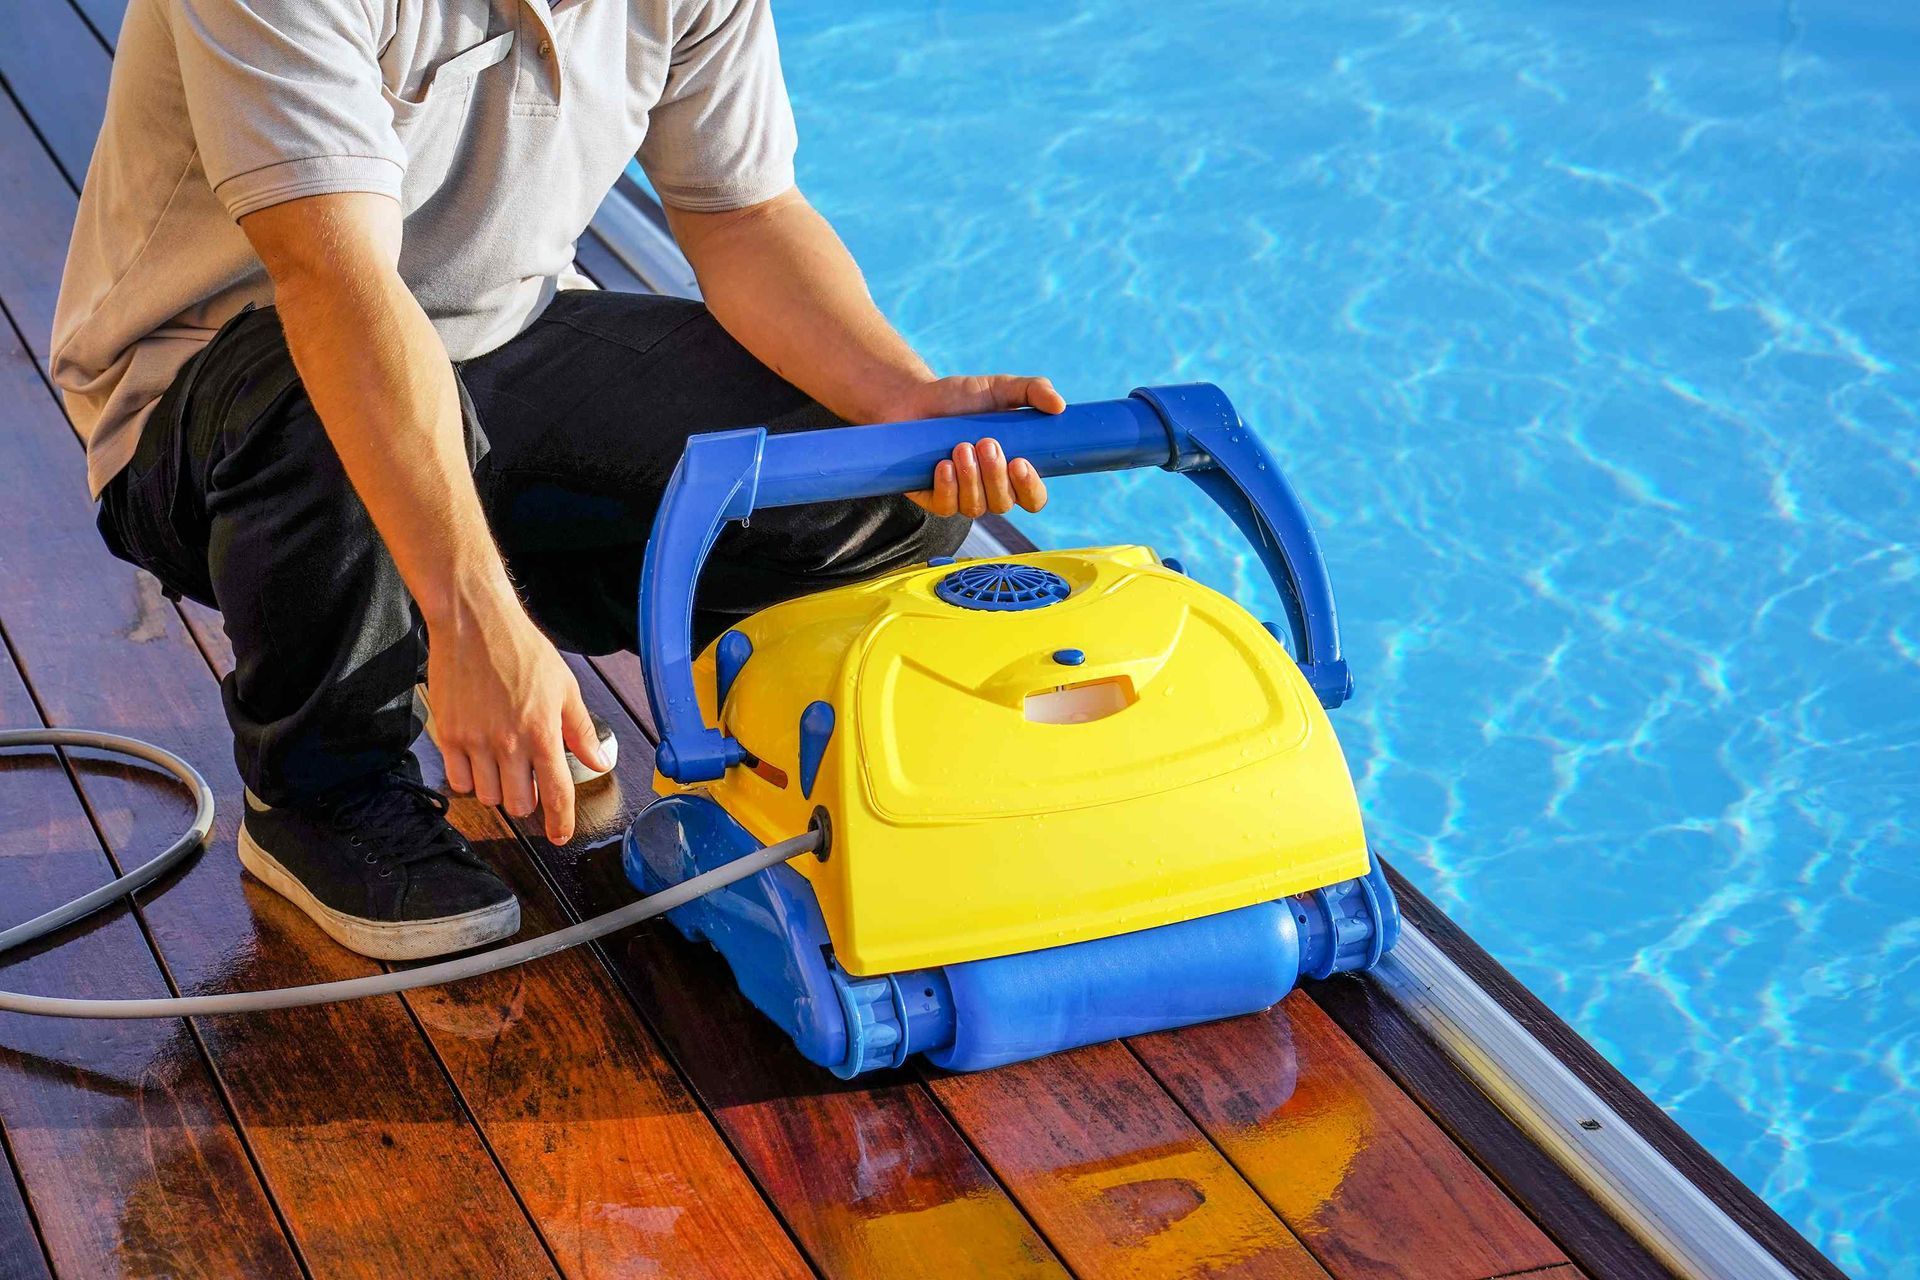 Worker using pool cleaning equipment